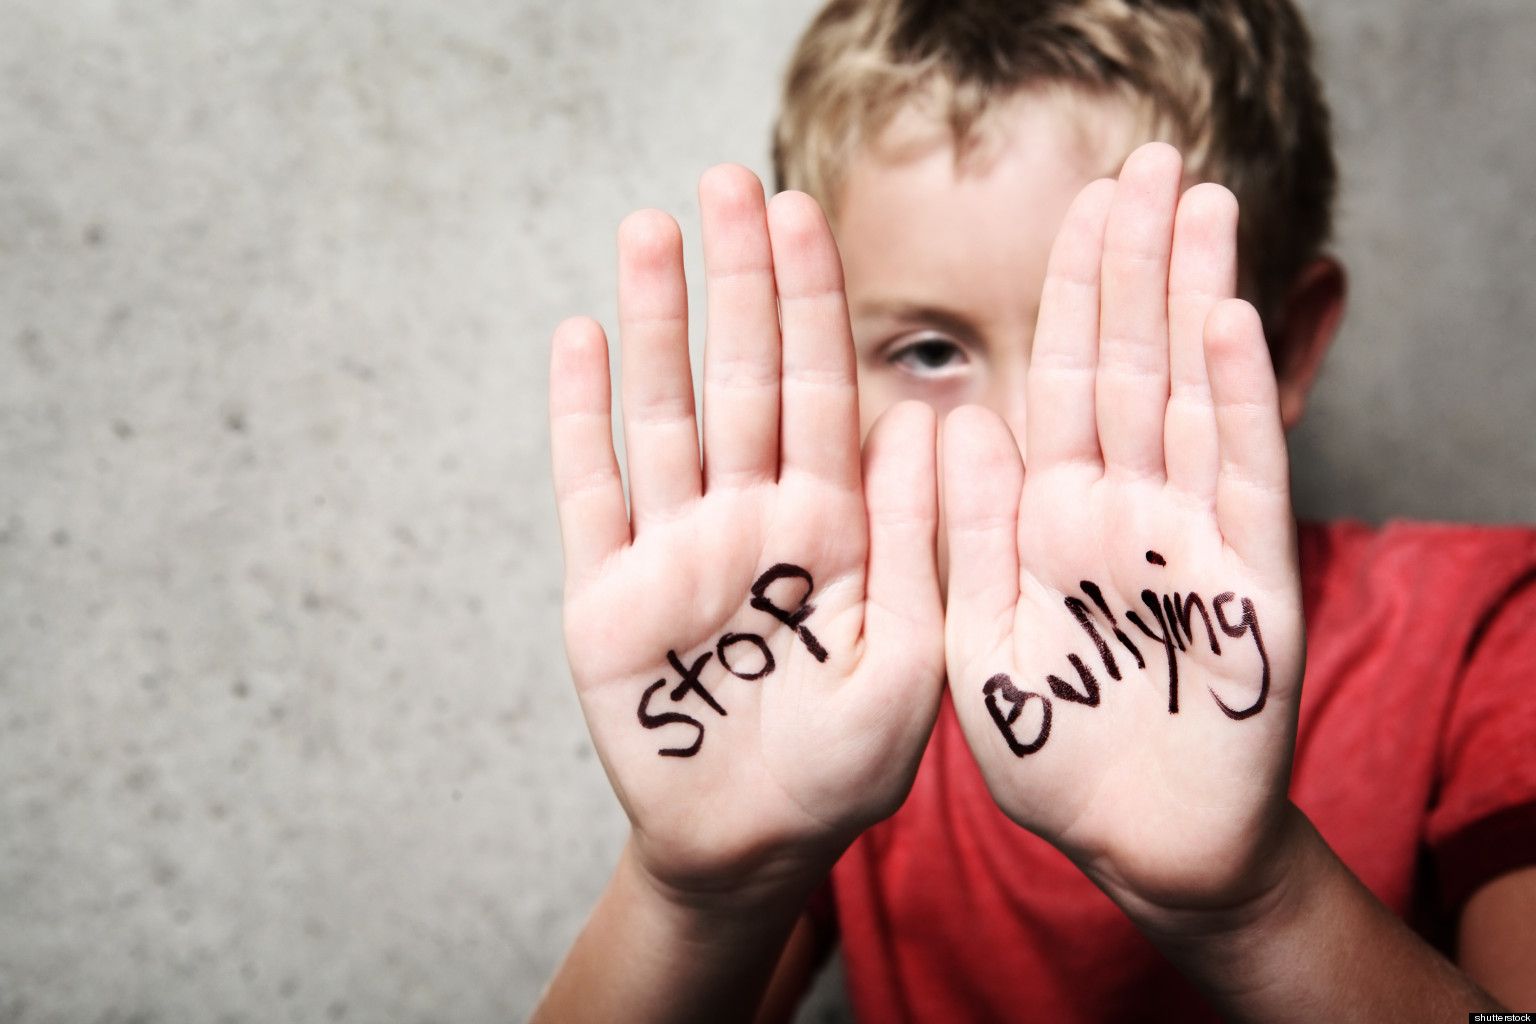 How to Minimize Bullying & Foster Dignity for All Students